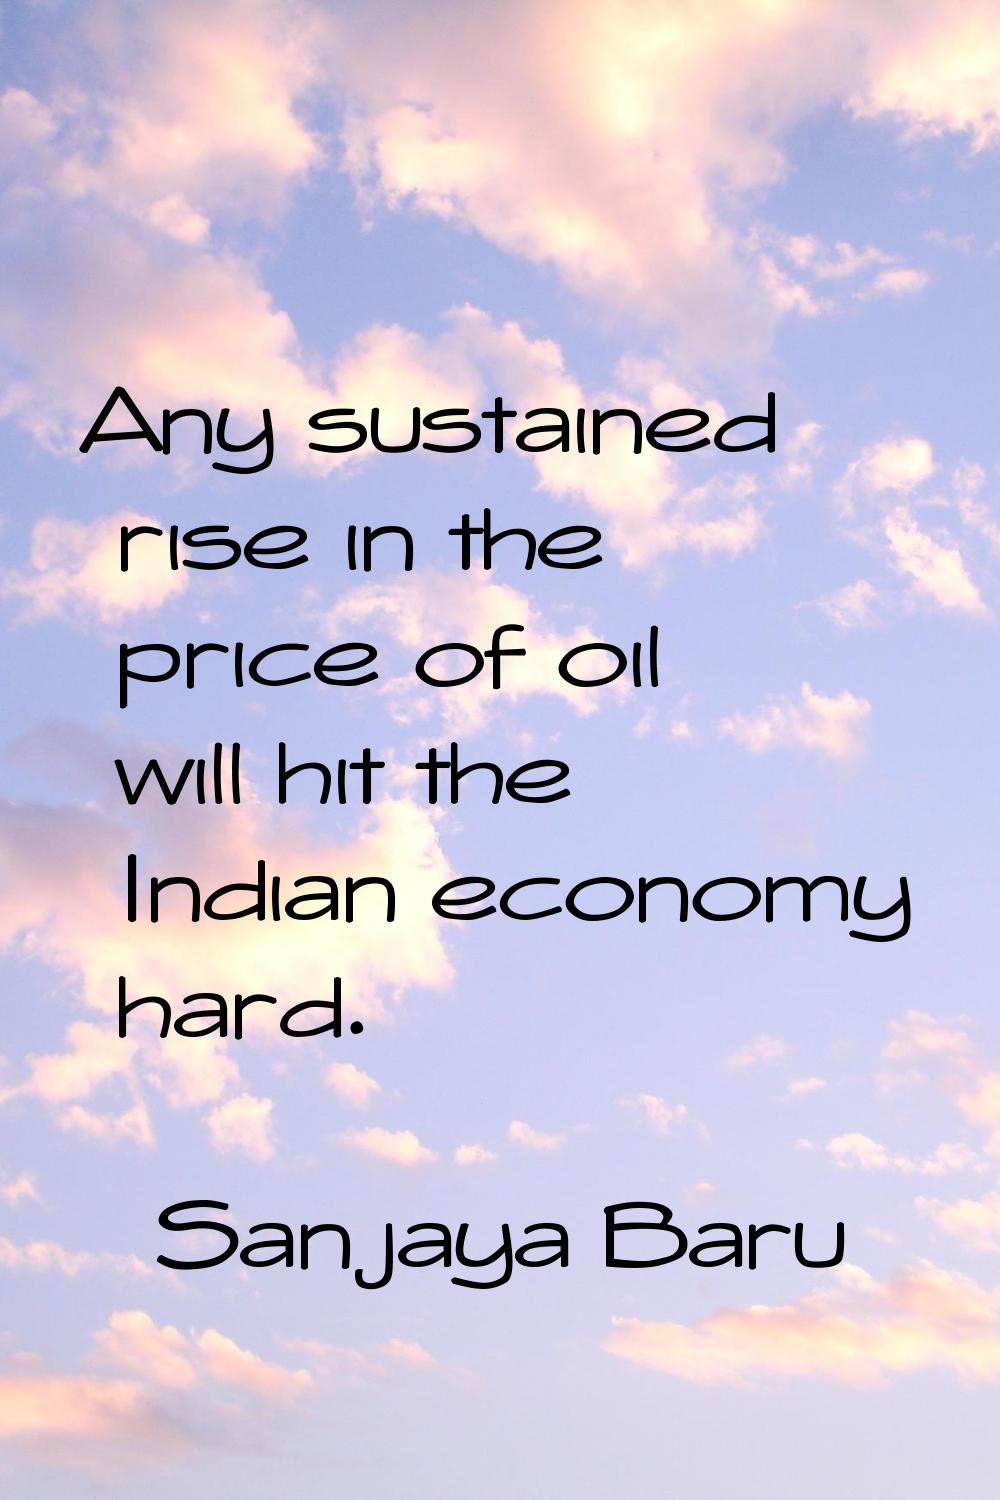 Any sustained rise in the price of oil will hit the Indian economy hard.